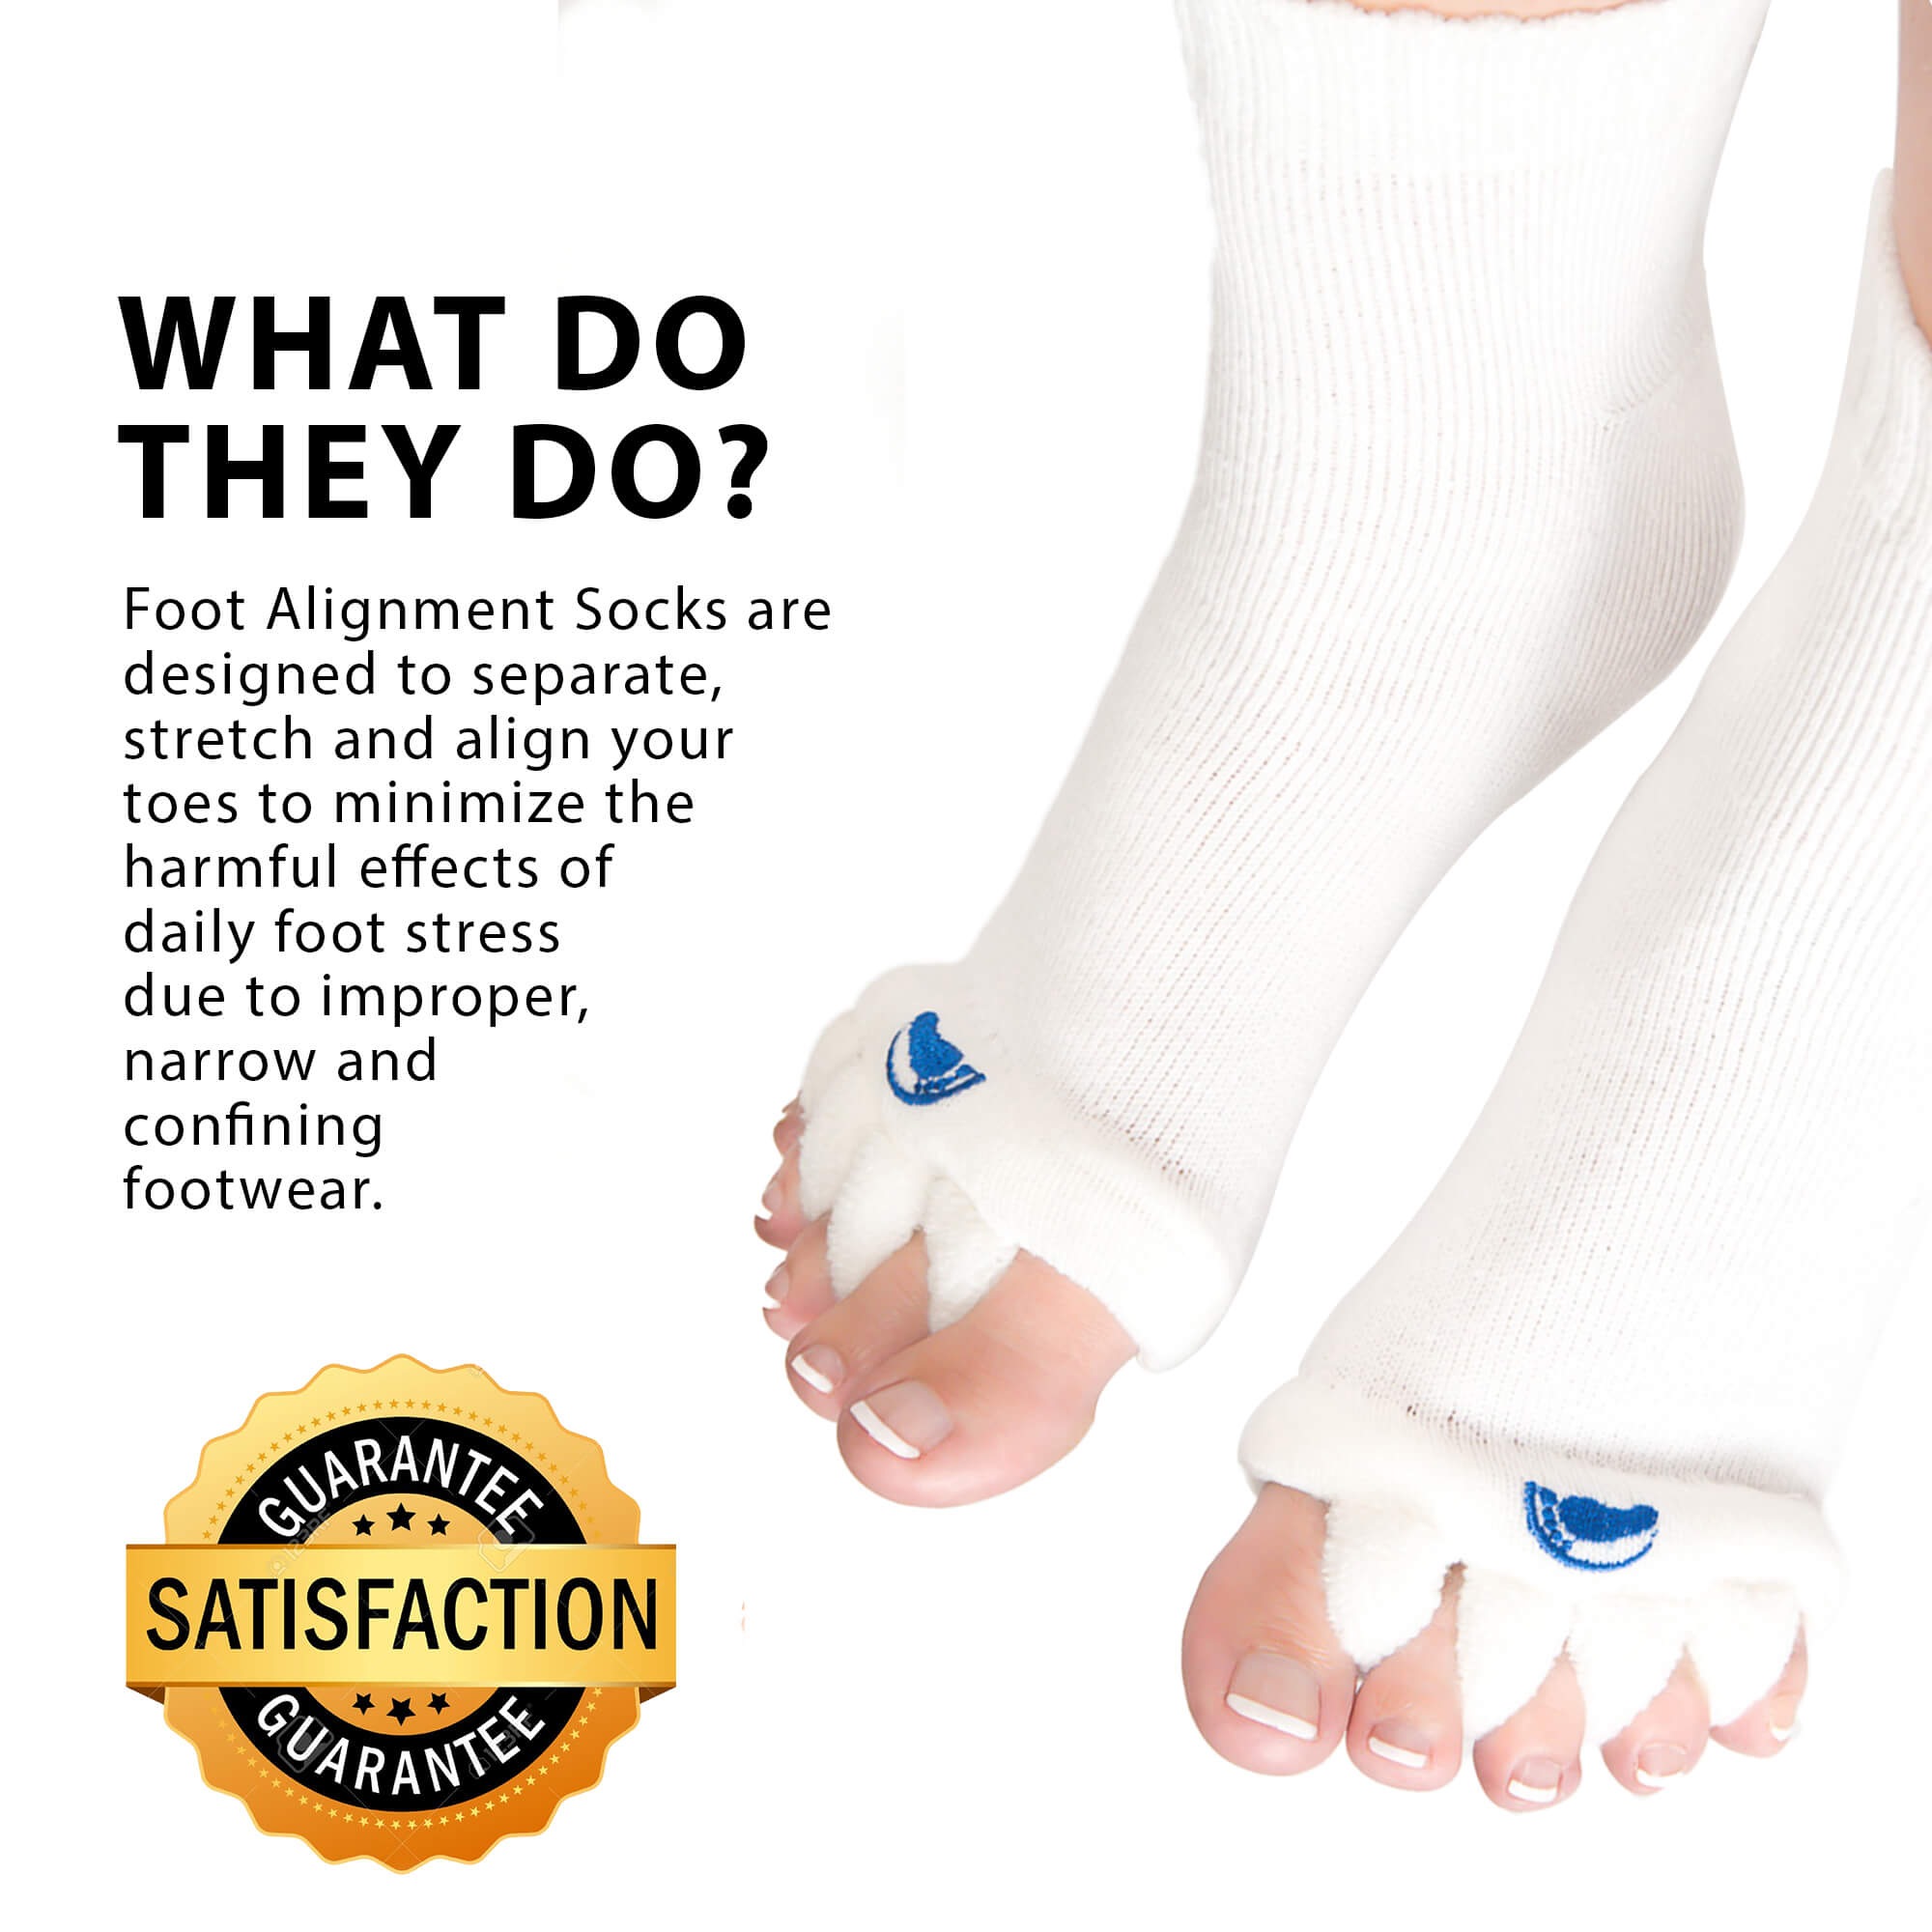 Foot Alignment Socks help sore and painful feet improve – My-Happy